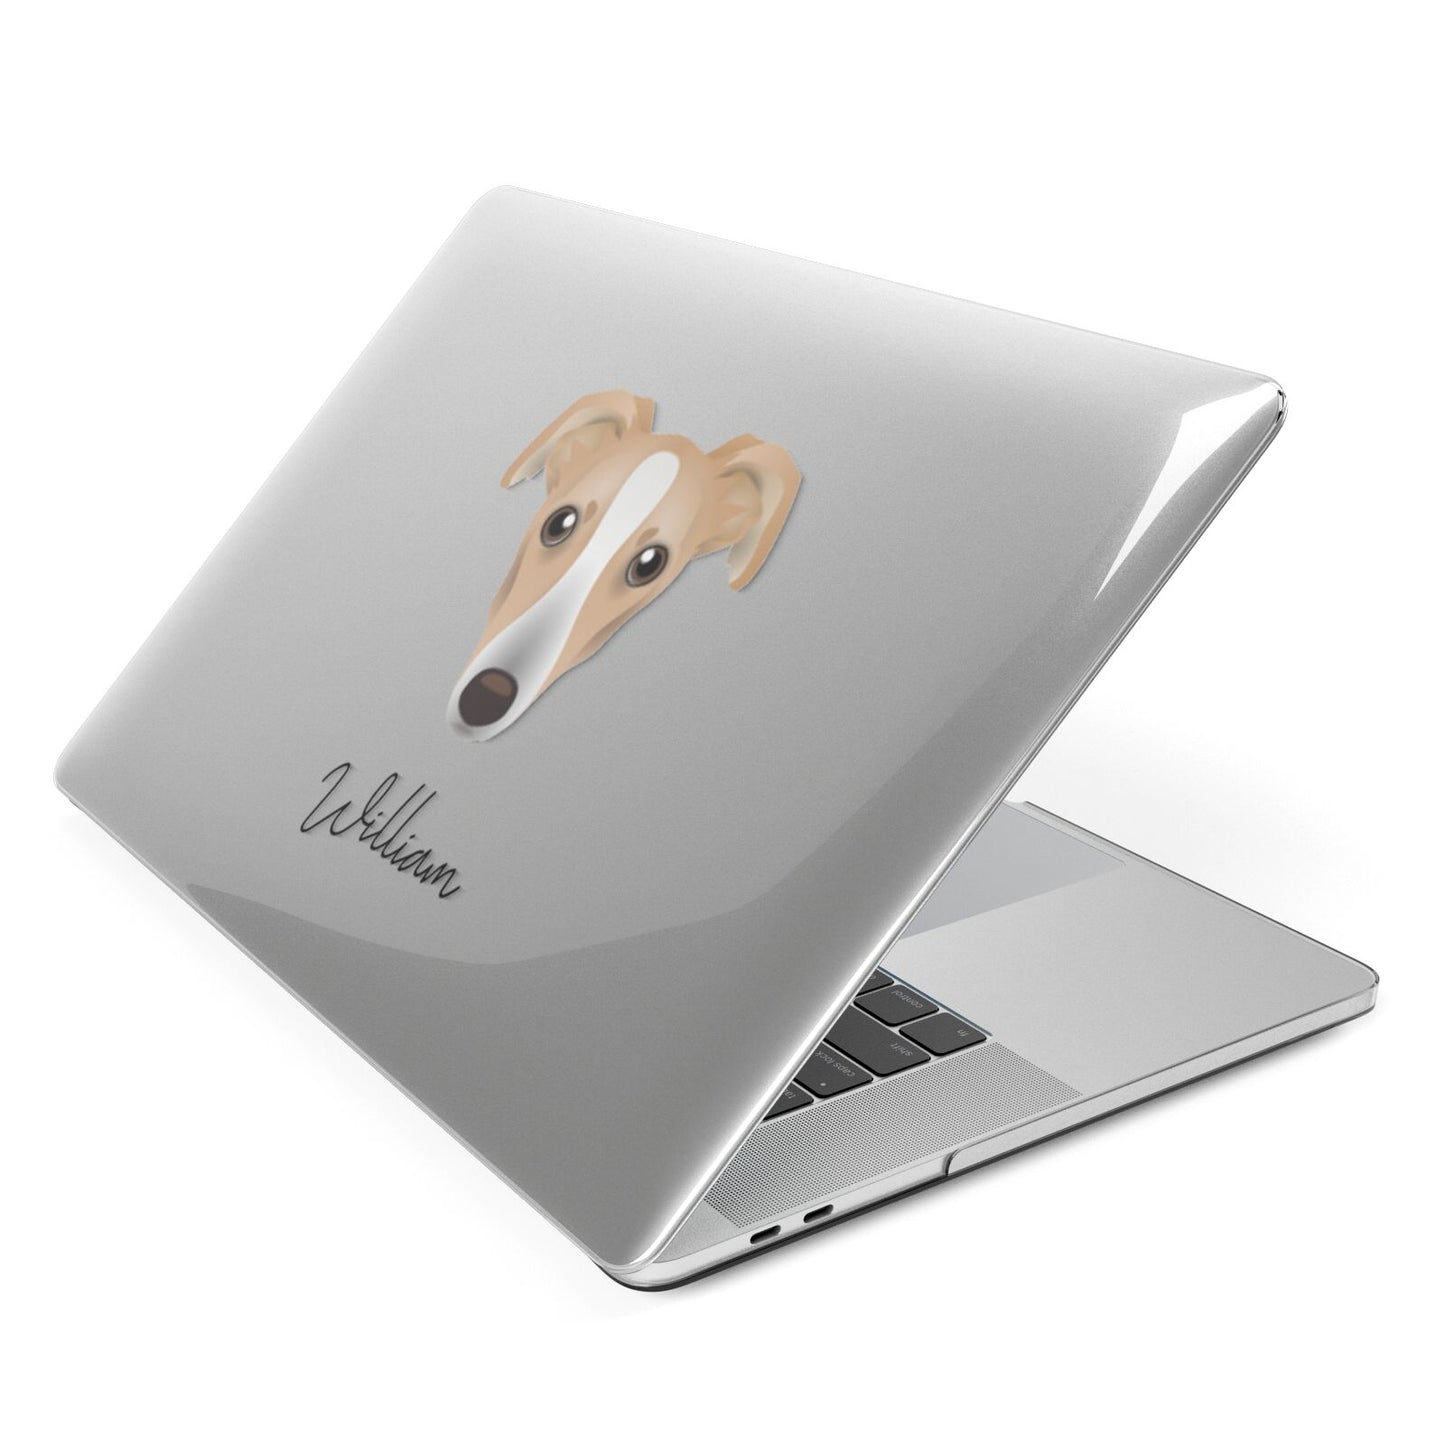 Lurcher Personalised Apple MacBook Case Side View